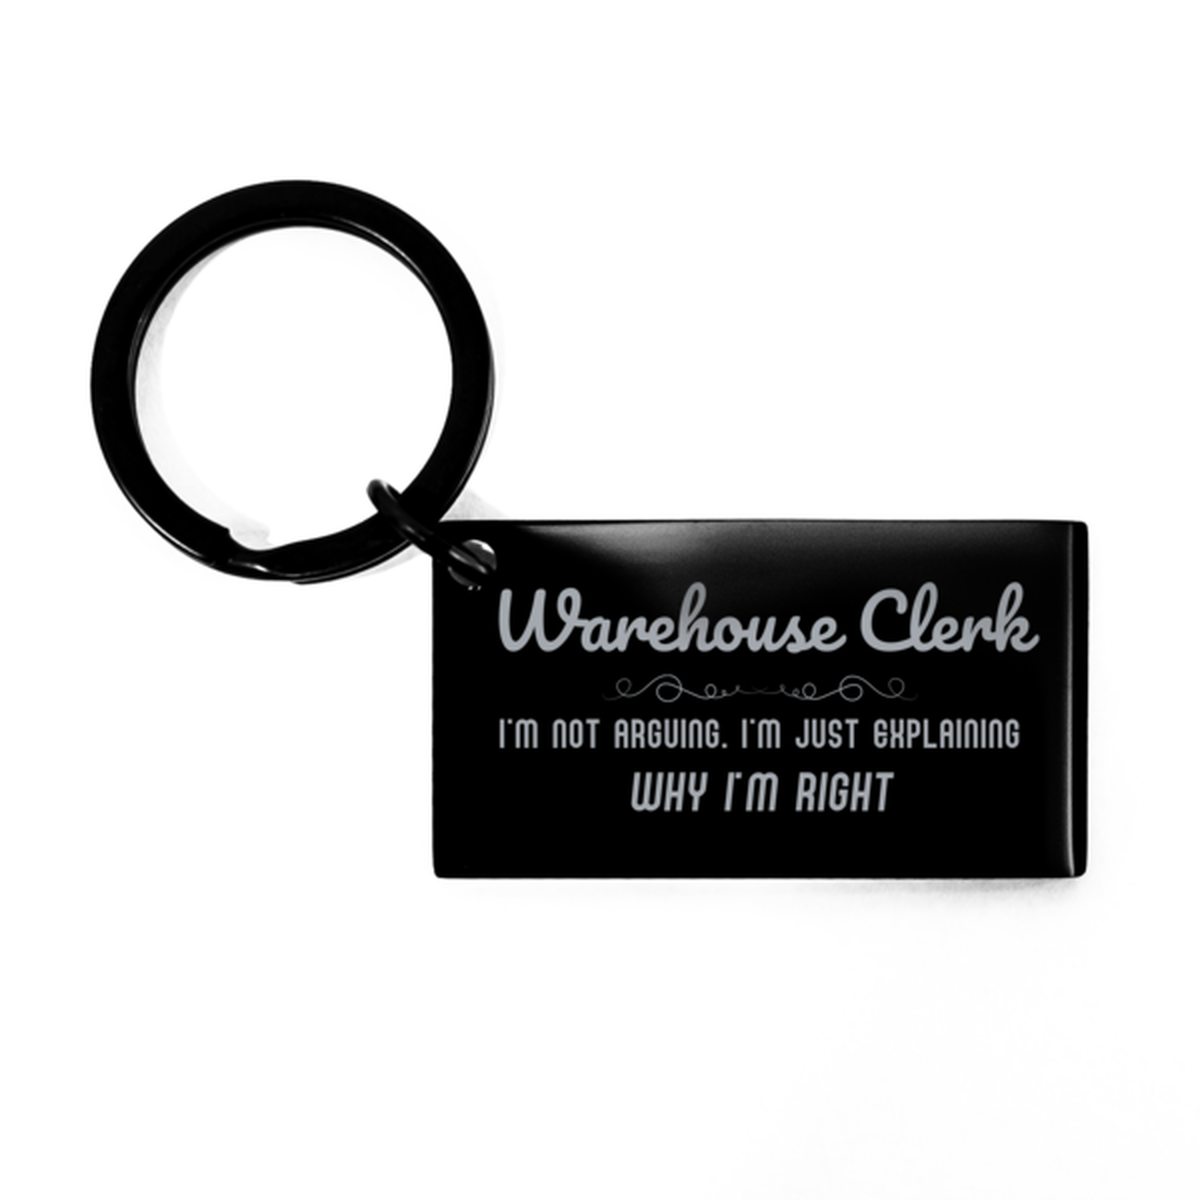 Warehouse Clerk I'm not Arguing. I'm Just Explaining Why I'm RIGHT Keychain, Funny Saying Quote Warehouse Clerk Gifts For Warehouse Clerk Graduation Birthday Christmas Gifts for Men Women Coworker